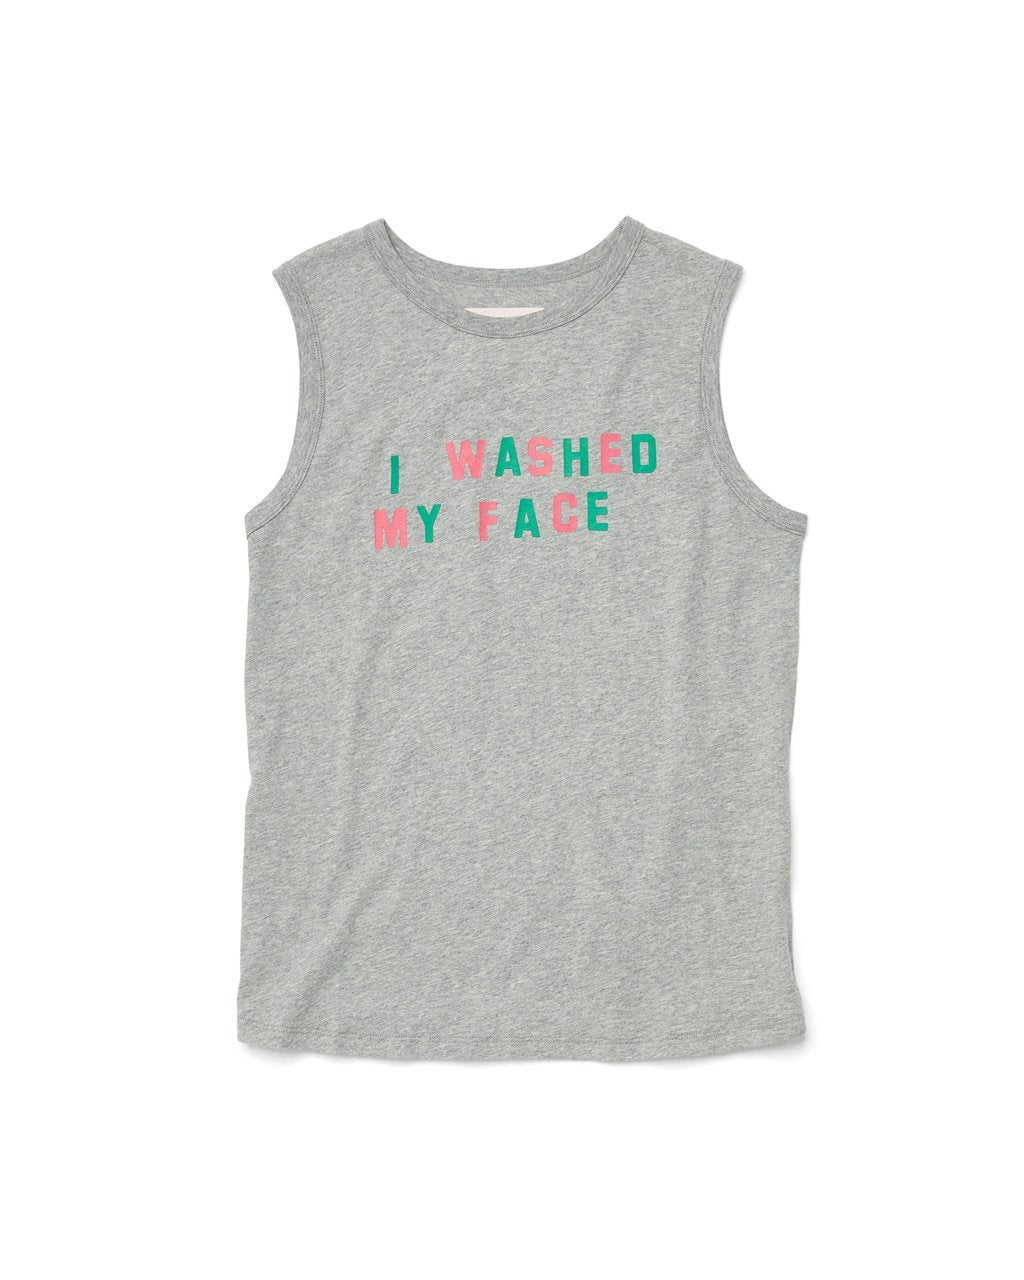 I Washed My Face Muscle Tank – ban.do